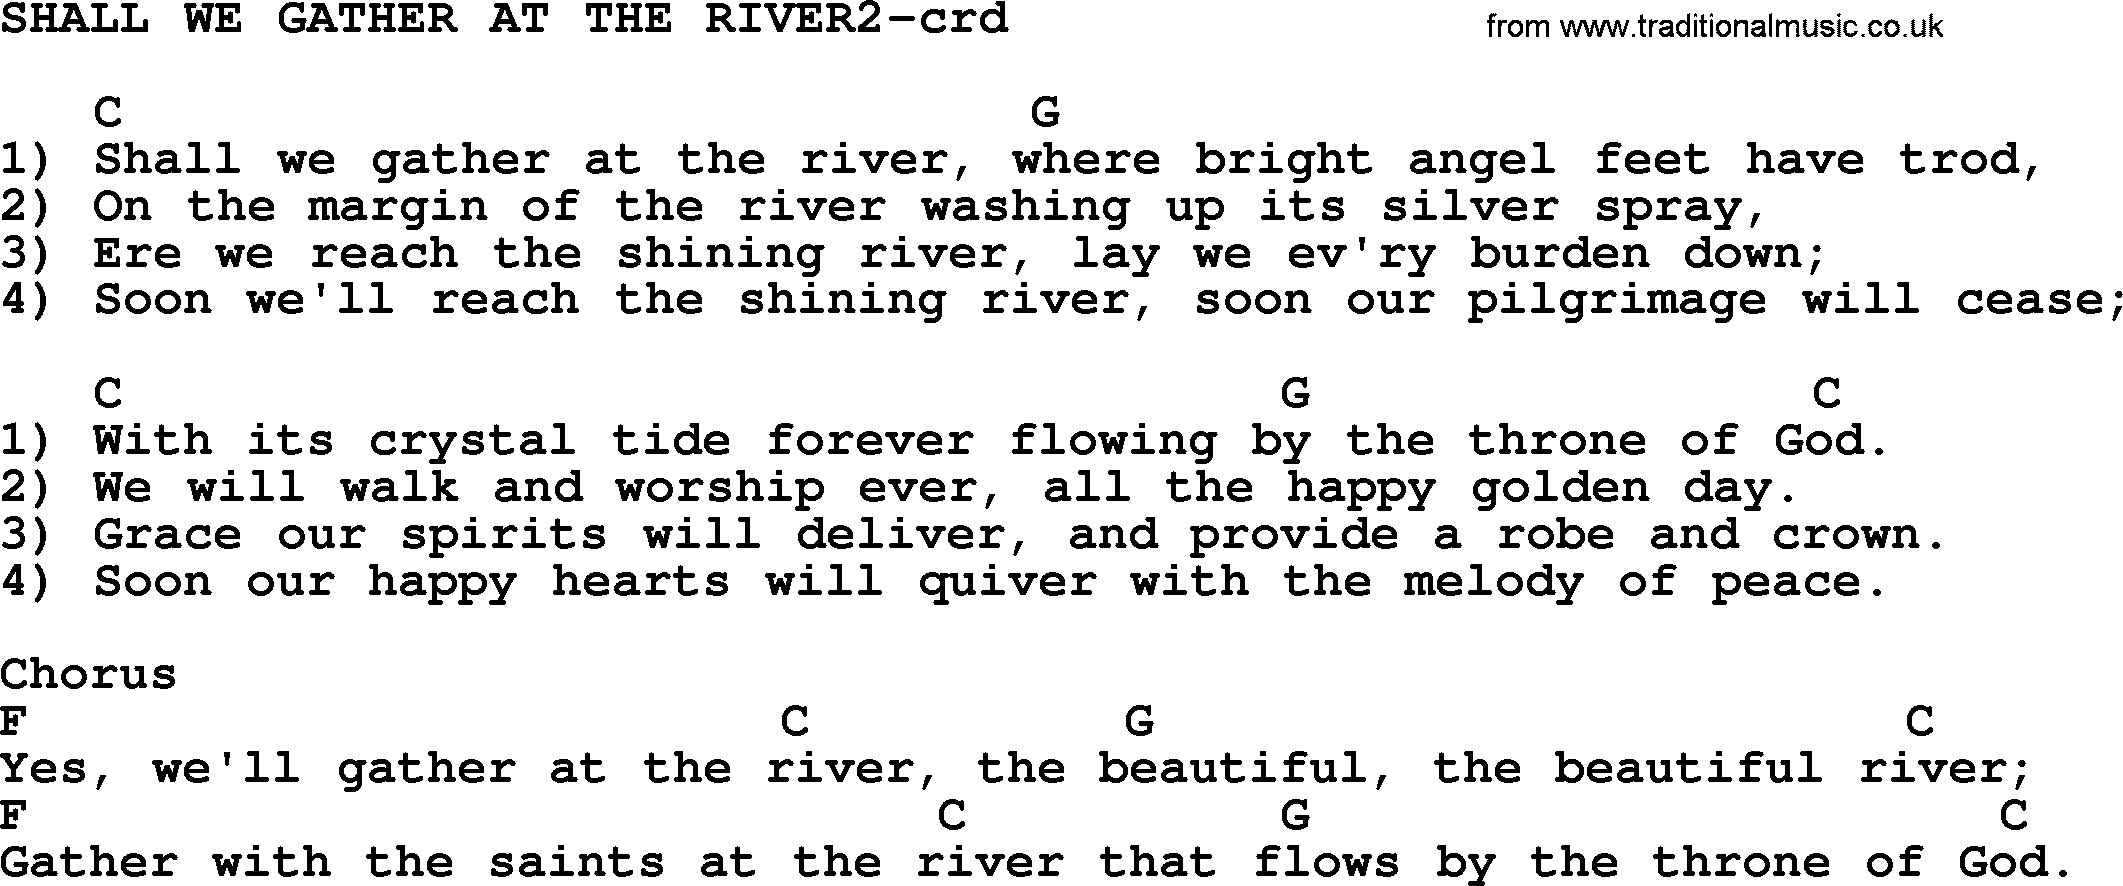 Hymns about Angels, Hymn: Shall We Gather At The River2, lyrics and Chords with PDF